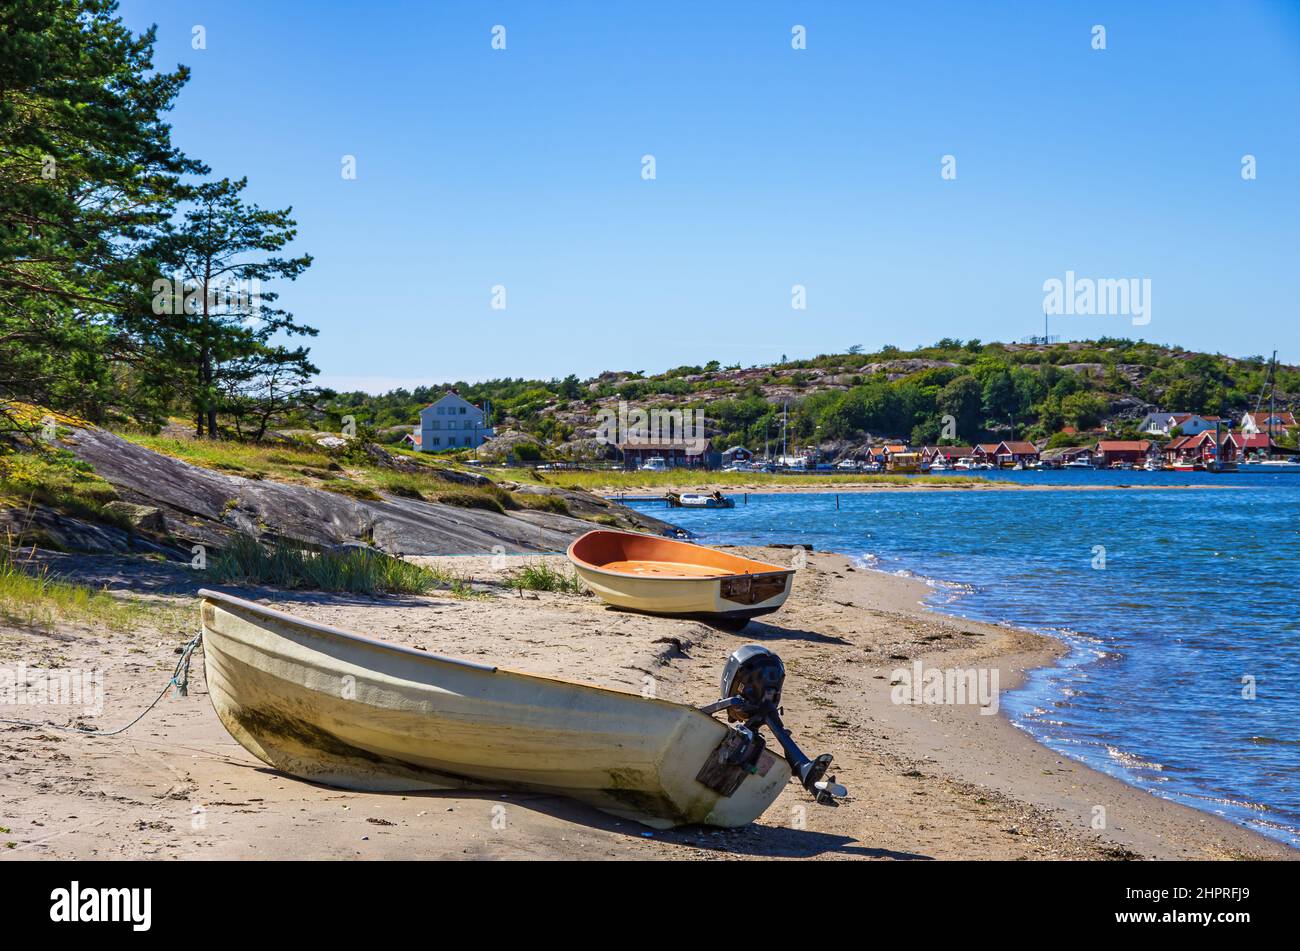 Two boats lie ashore on the North shore of Southkoster Island and beautiful view of the North Koster Island, Bohuslän, Sweden. Stock Photo